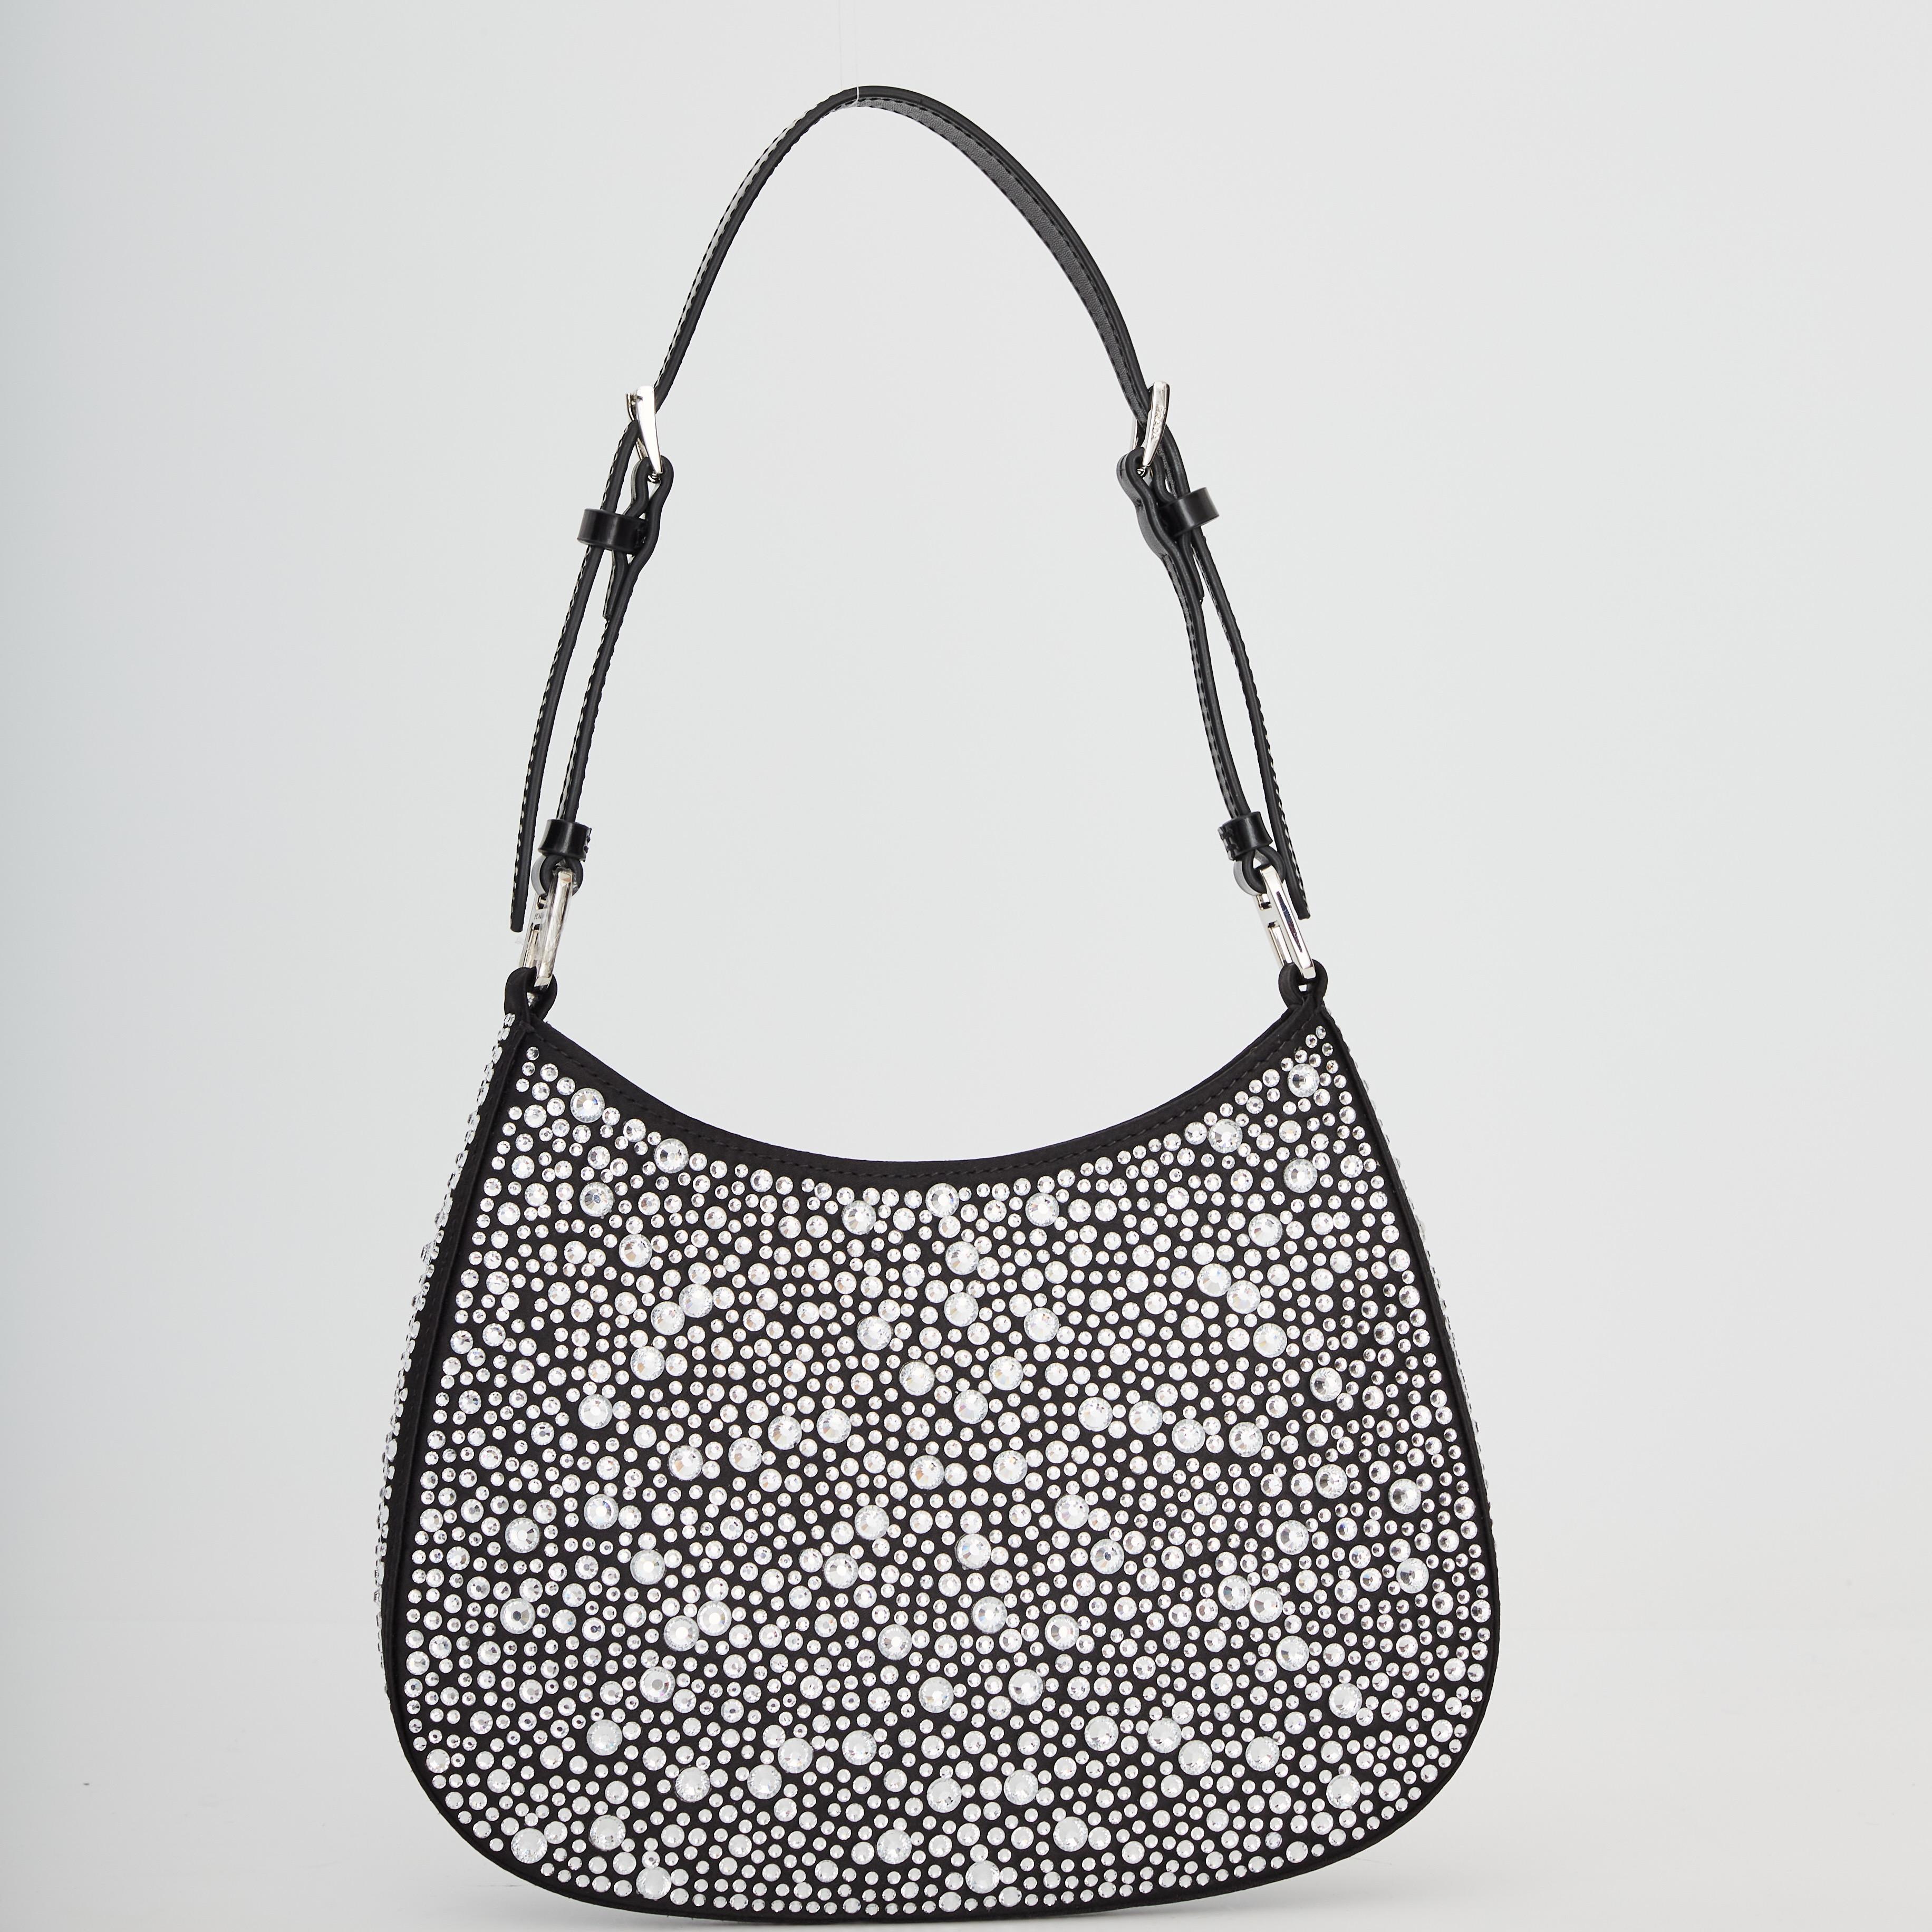 Satin shoulder bag in black featuring crystal-cut appliqués throughout.  Adjustable shoulder strap at top. Logo plaque at face. Press-stud closure at main compartment. Patch pocket at interior. · H 7.5 x W9 x D1 in

COLOR: black with sliver